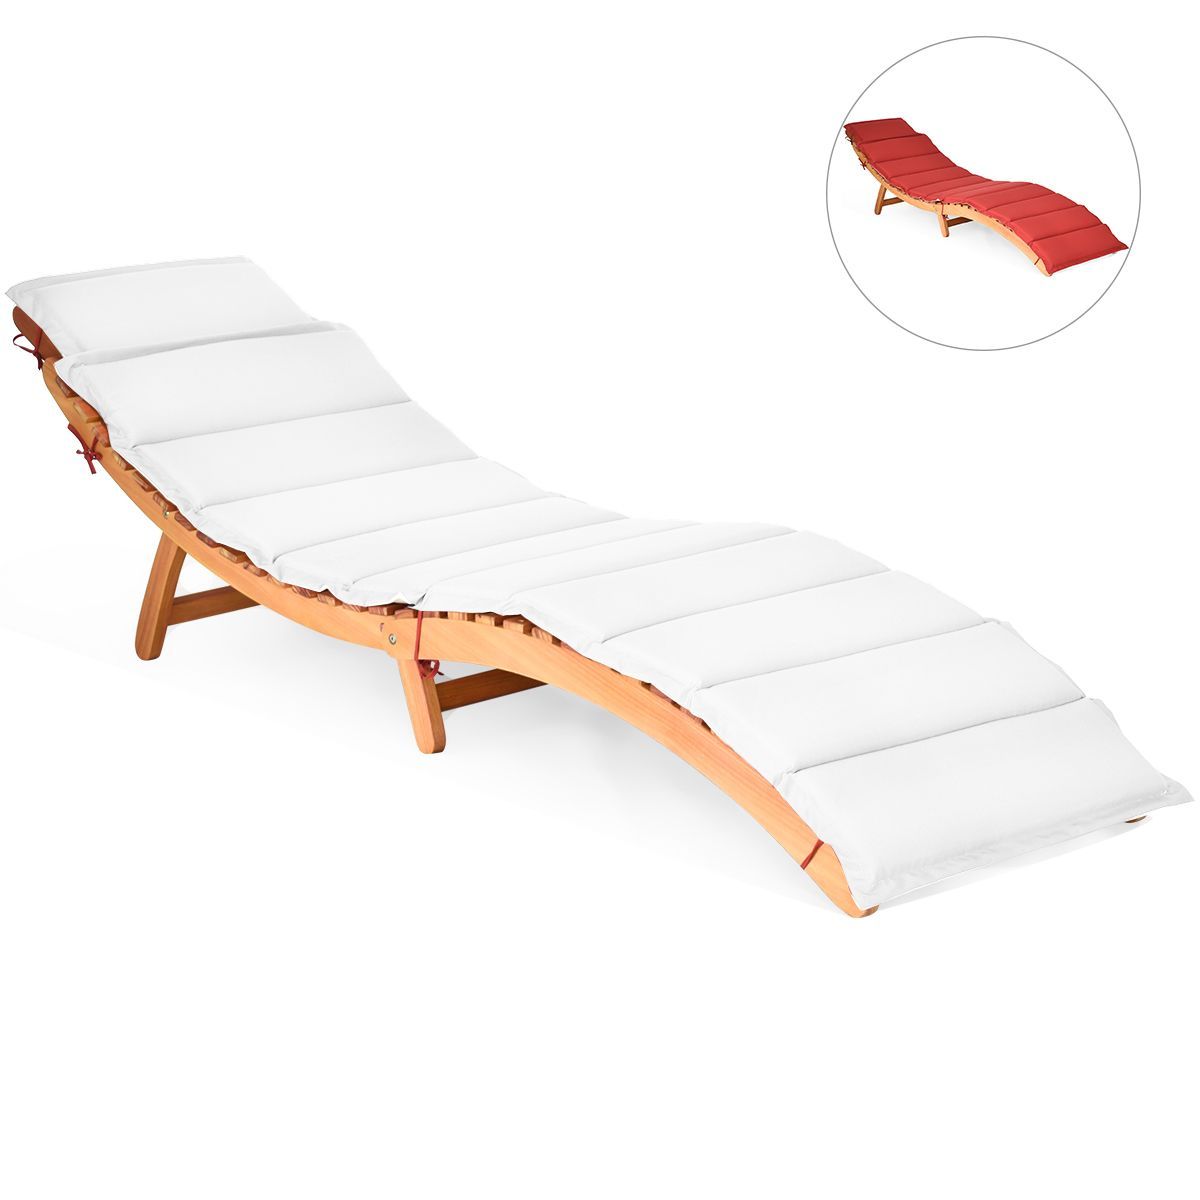 Costway Folding Wooden Outdoor Lounge Chair Chaise Red/White Cushion Pad Pool Deck | Target